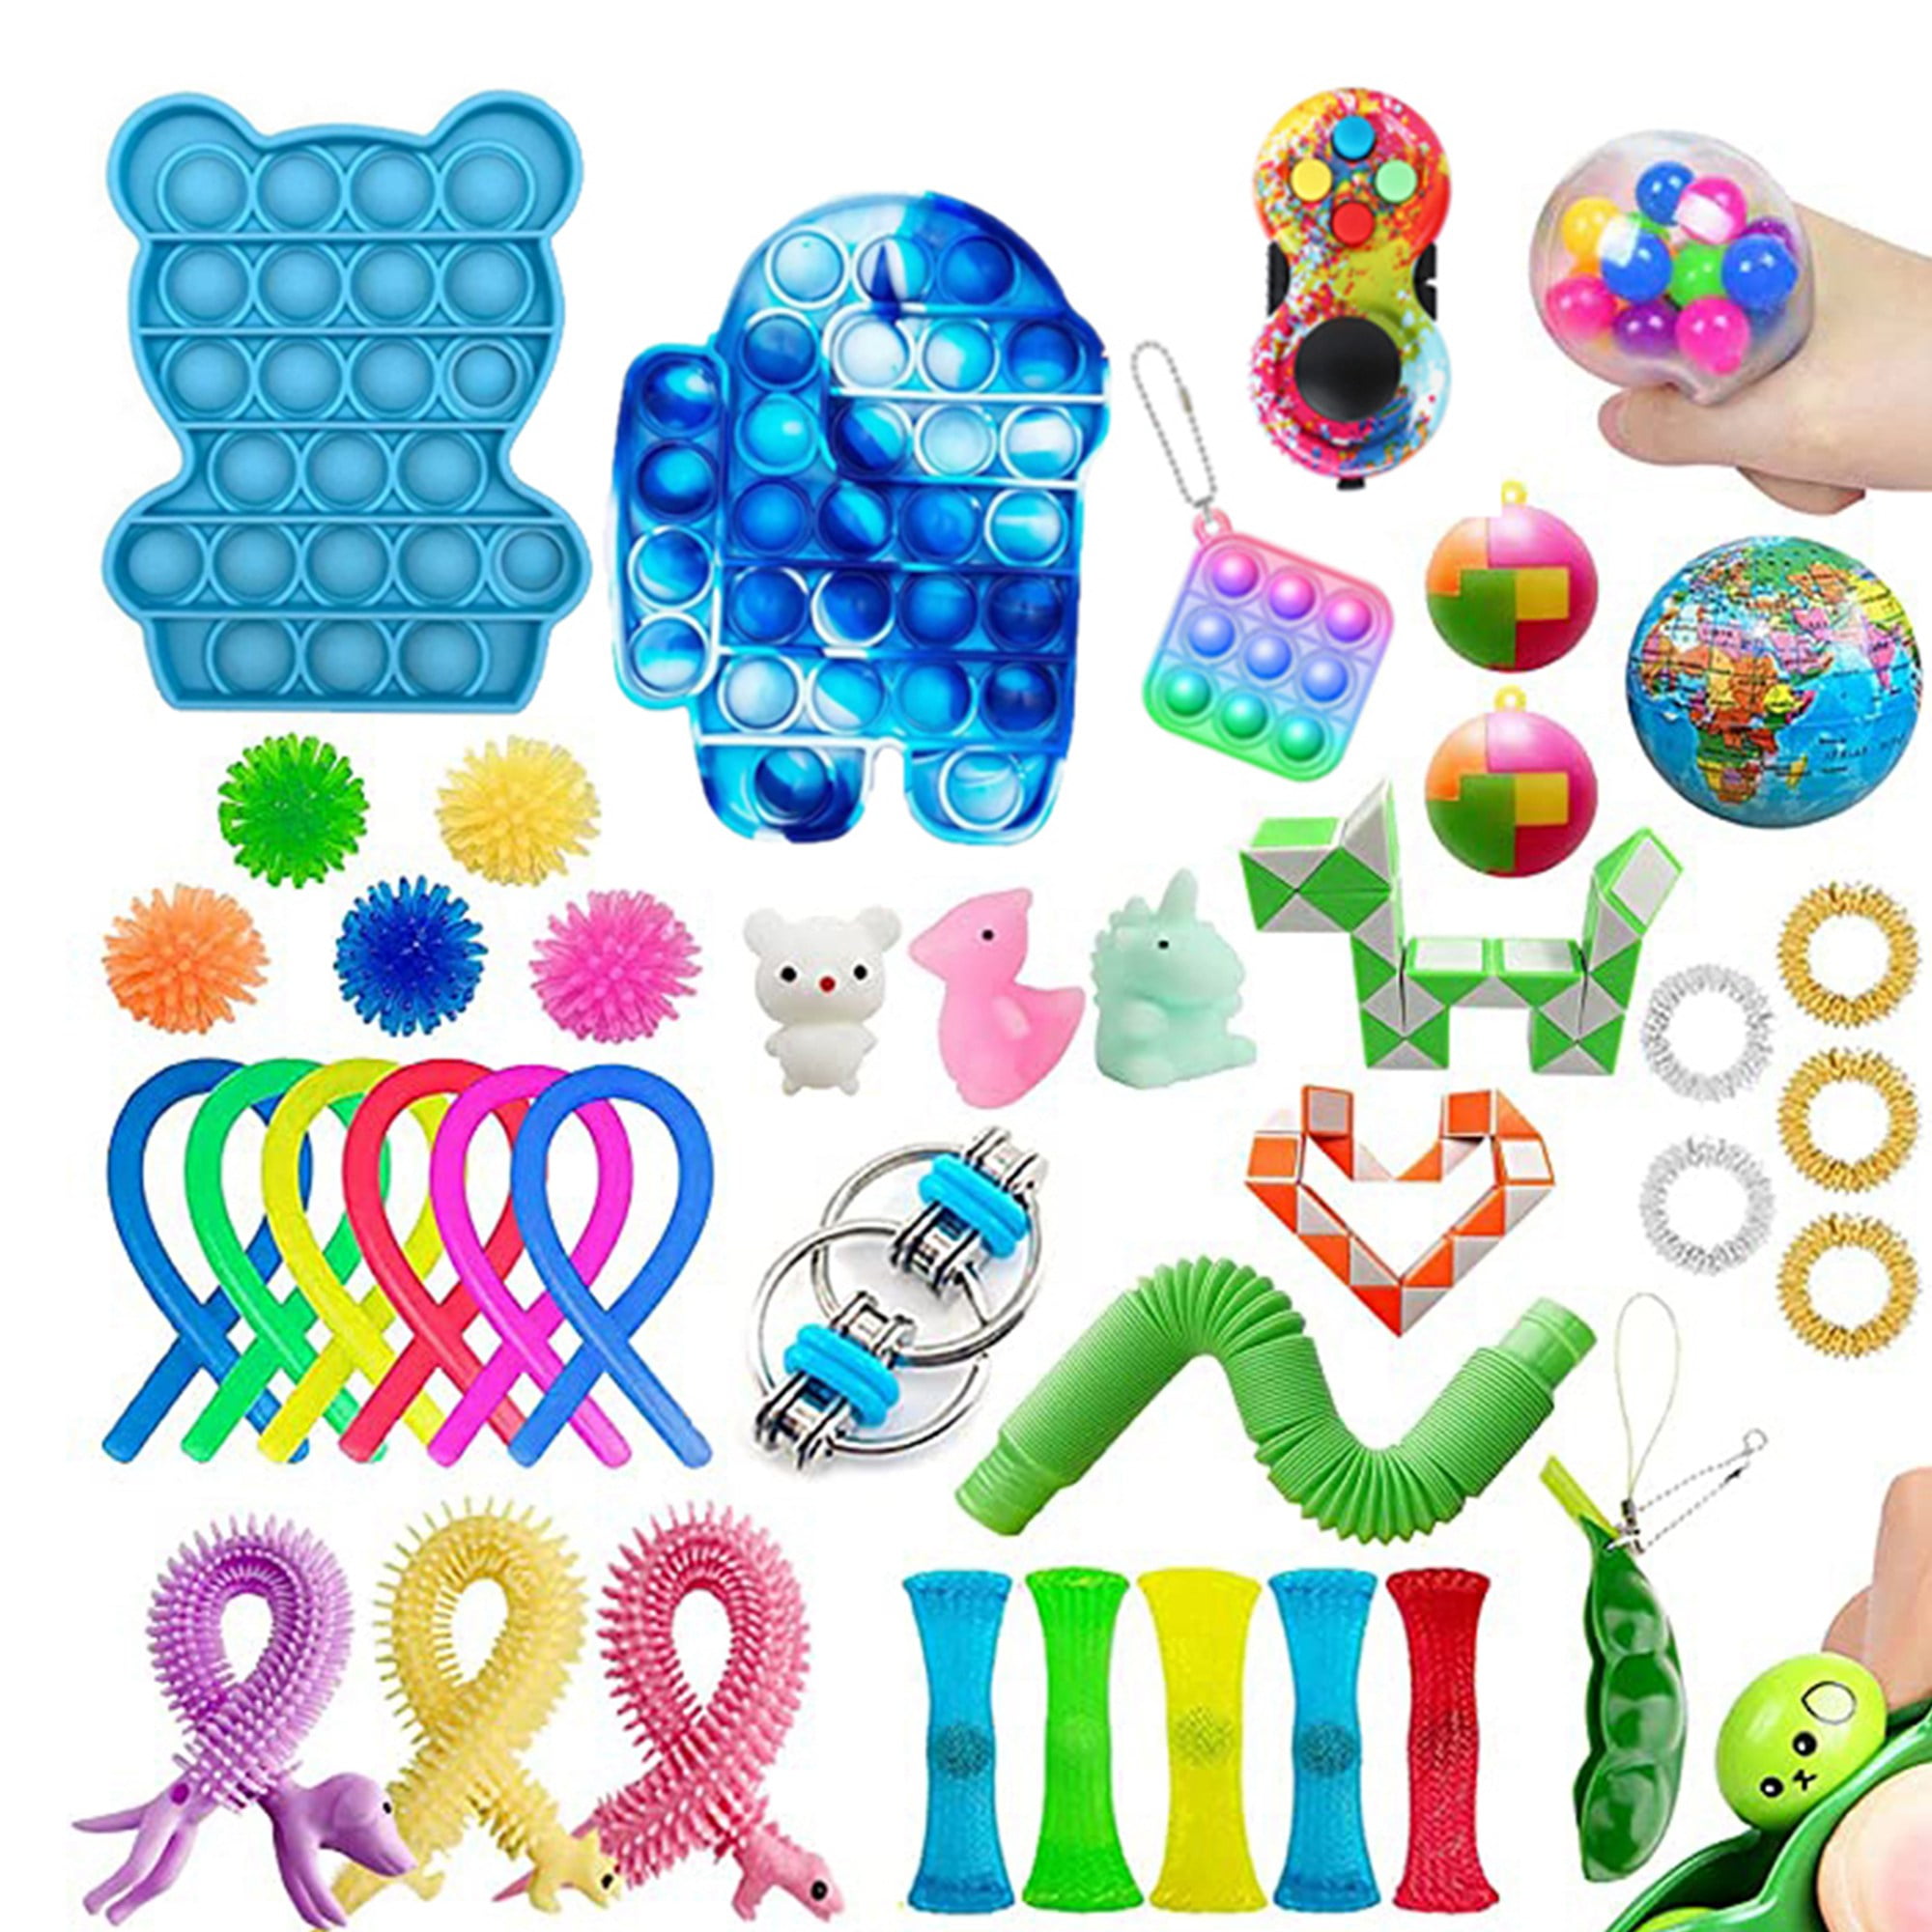 for Birthday Party Favors Classroom Rewards Prizes i-FSK Fidget Toys Pack,35Pcs Fidget Sensory Toys Set,Relieves Stress & Anxiety Fidget Toy for Kids Adults 